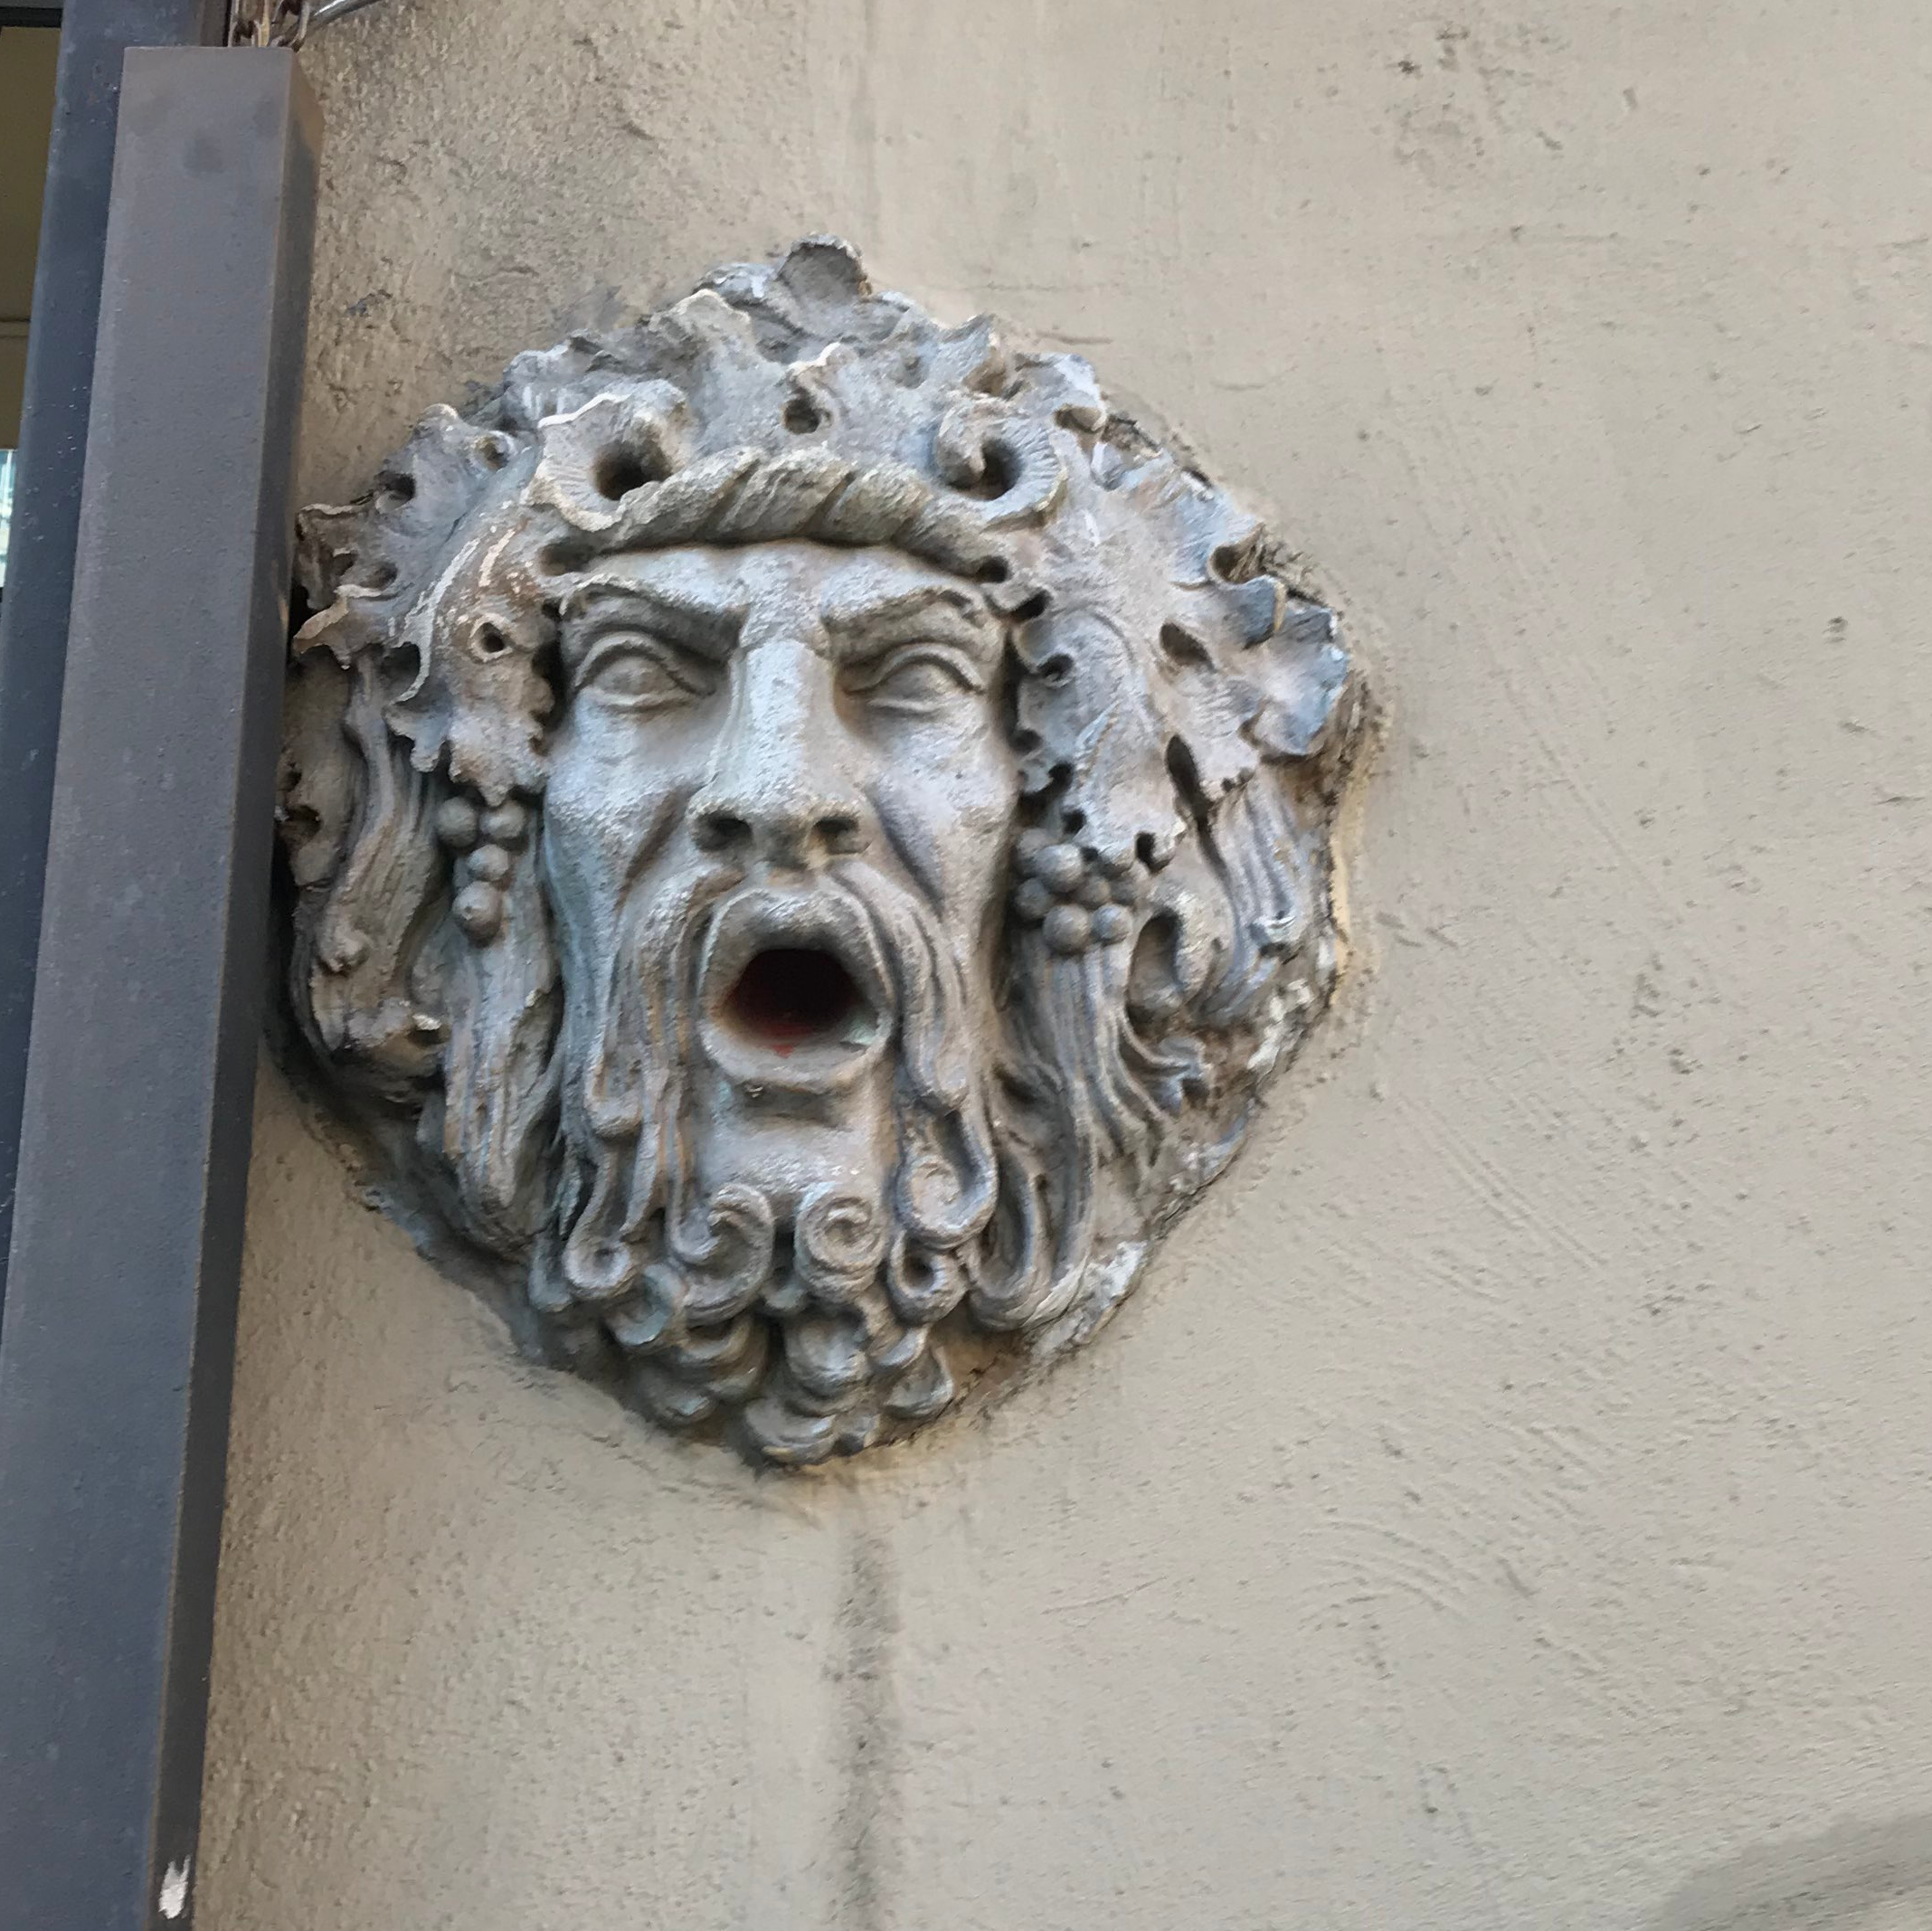 a statue of an angry looking man with a beard and his mouth open on the side of a building